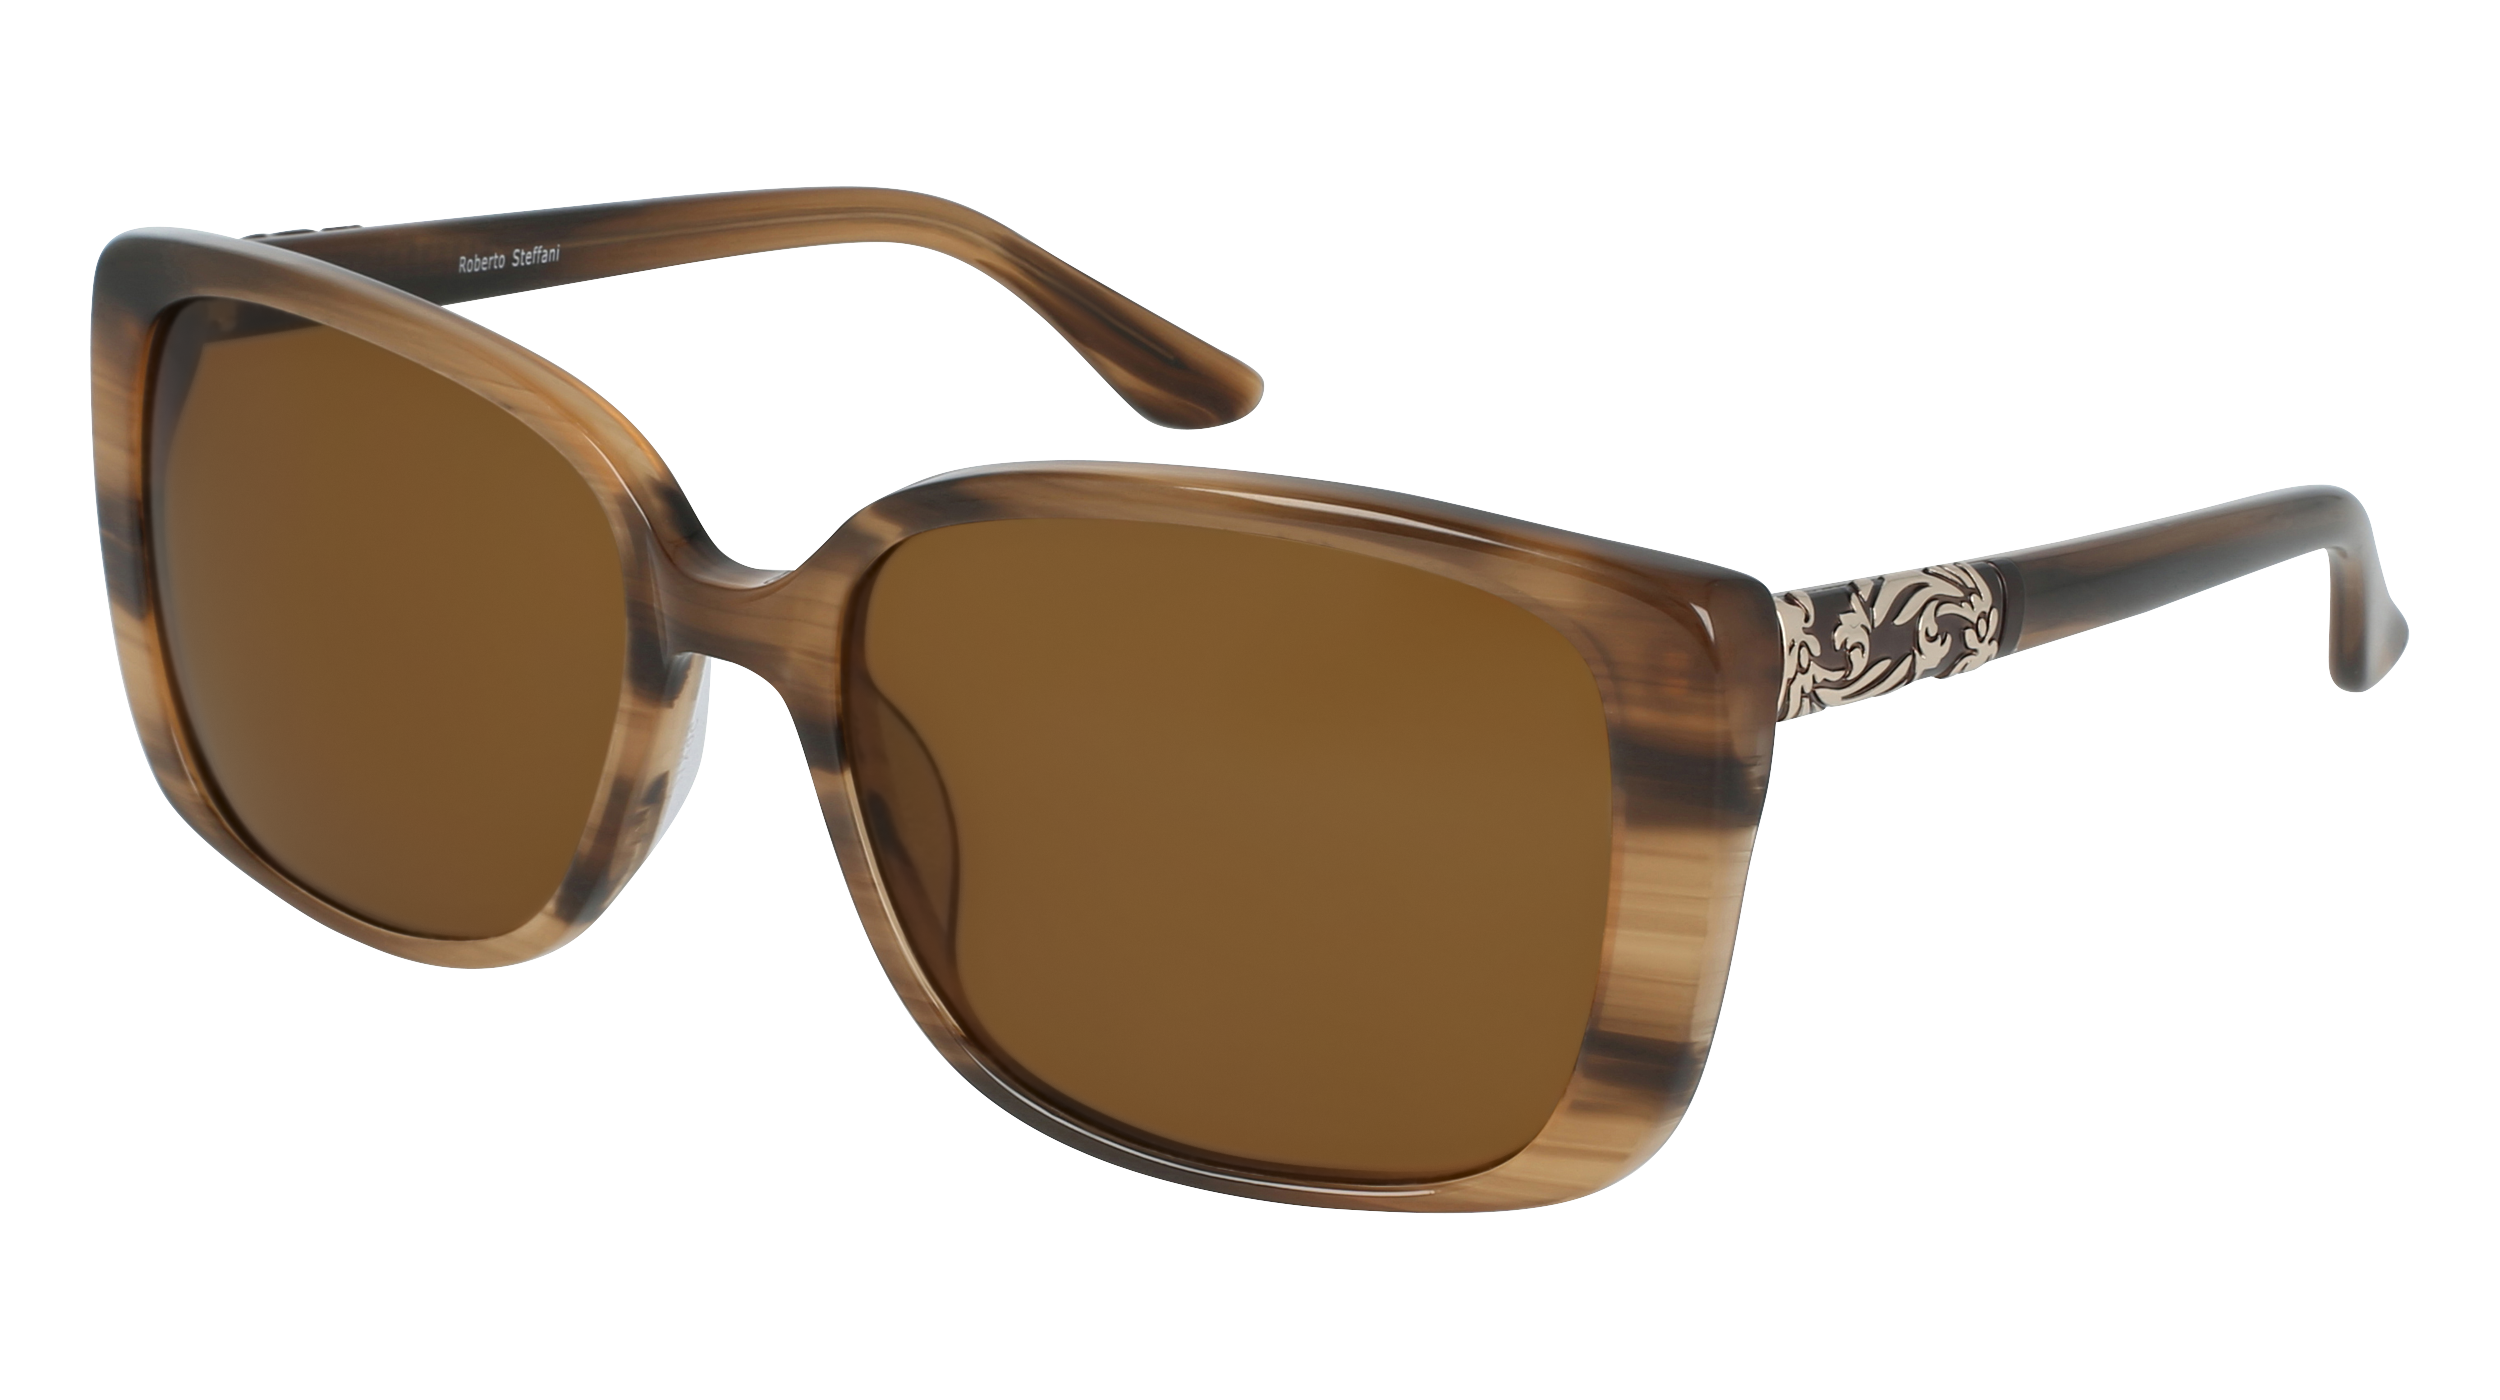 R RS 162/S women's sunglasses (from the side)